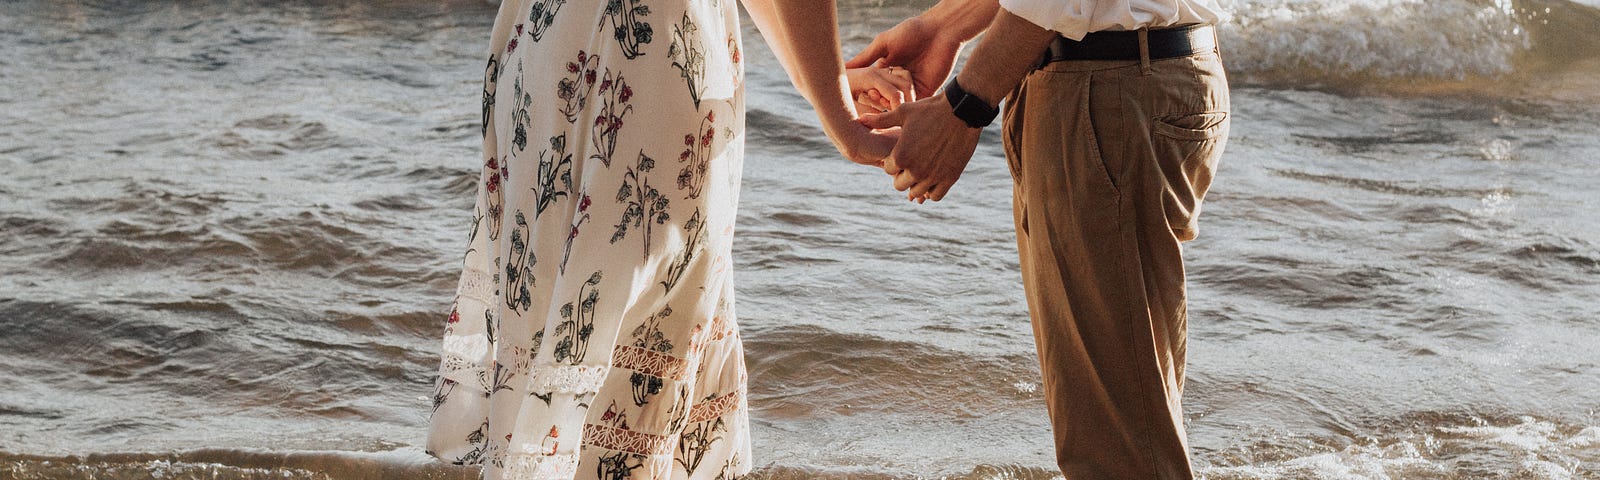 Couple holding hands on beach facing each other.